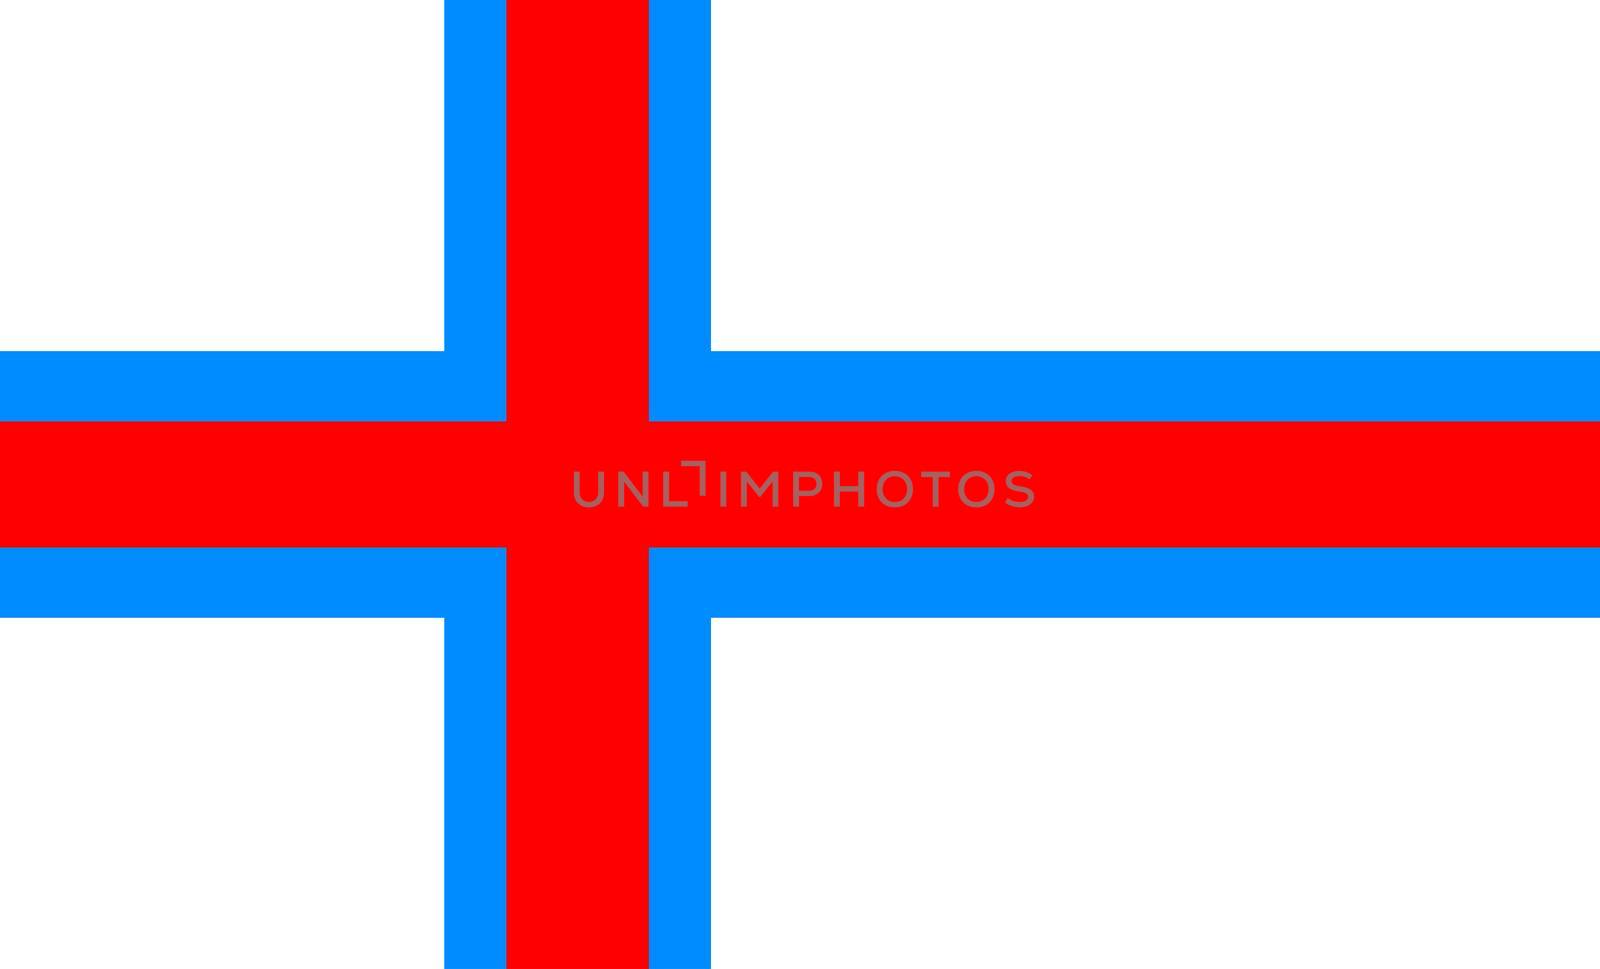 The flag of the Faroe Islands blue red and white